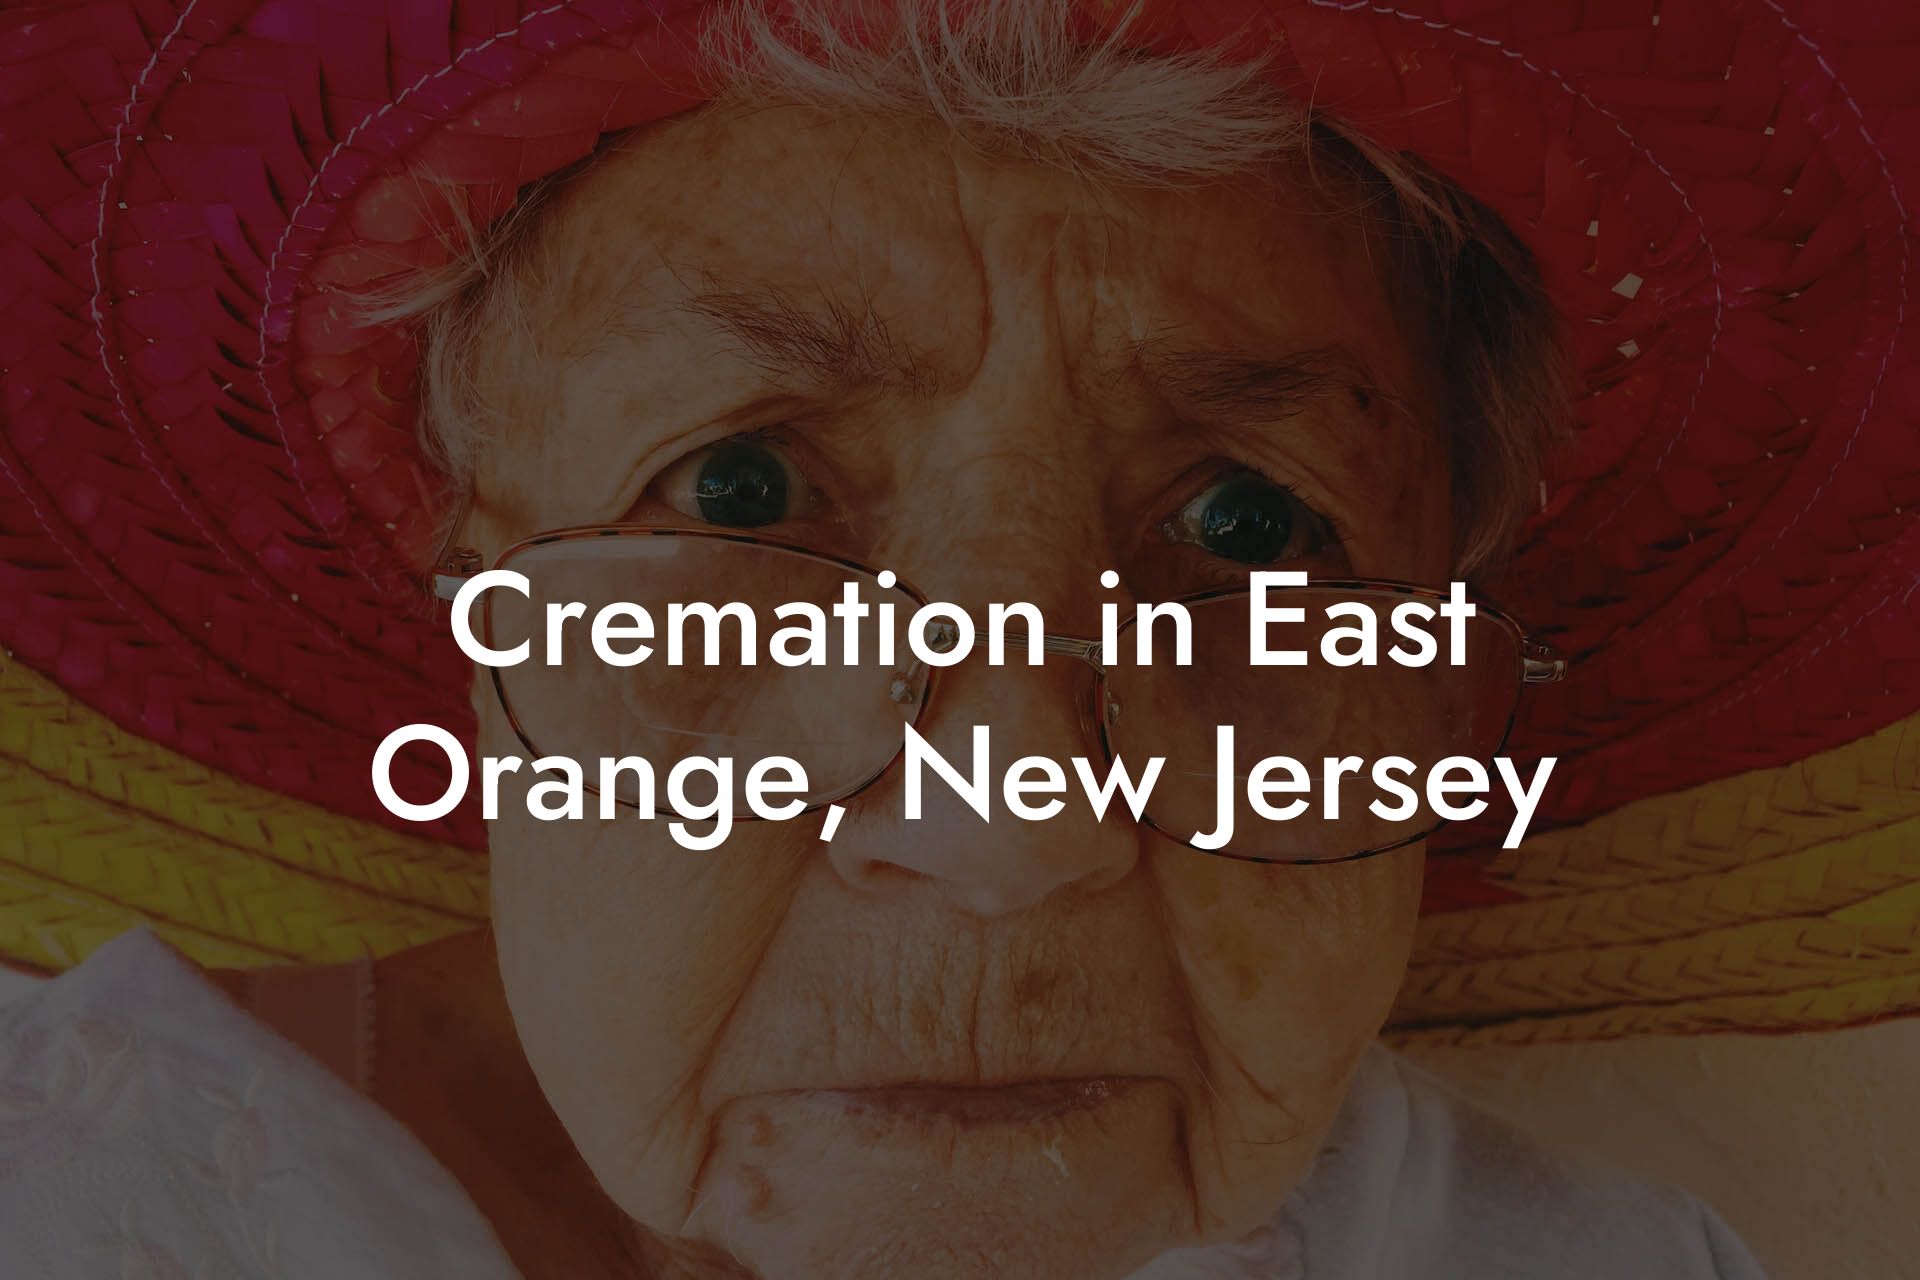 Cremation in East Orange, New Jersey